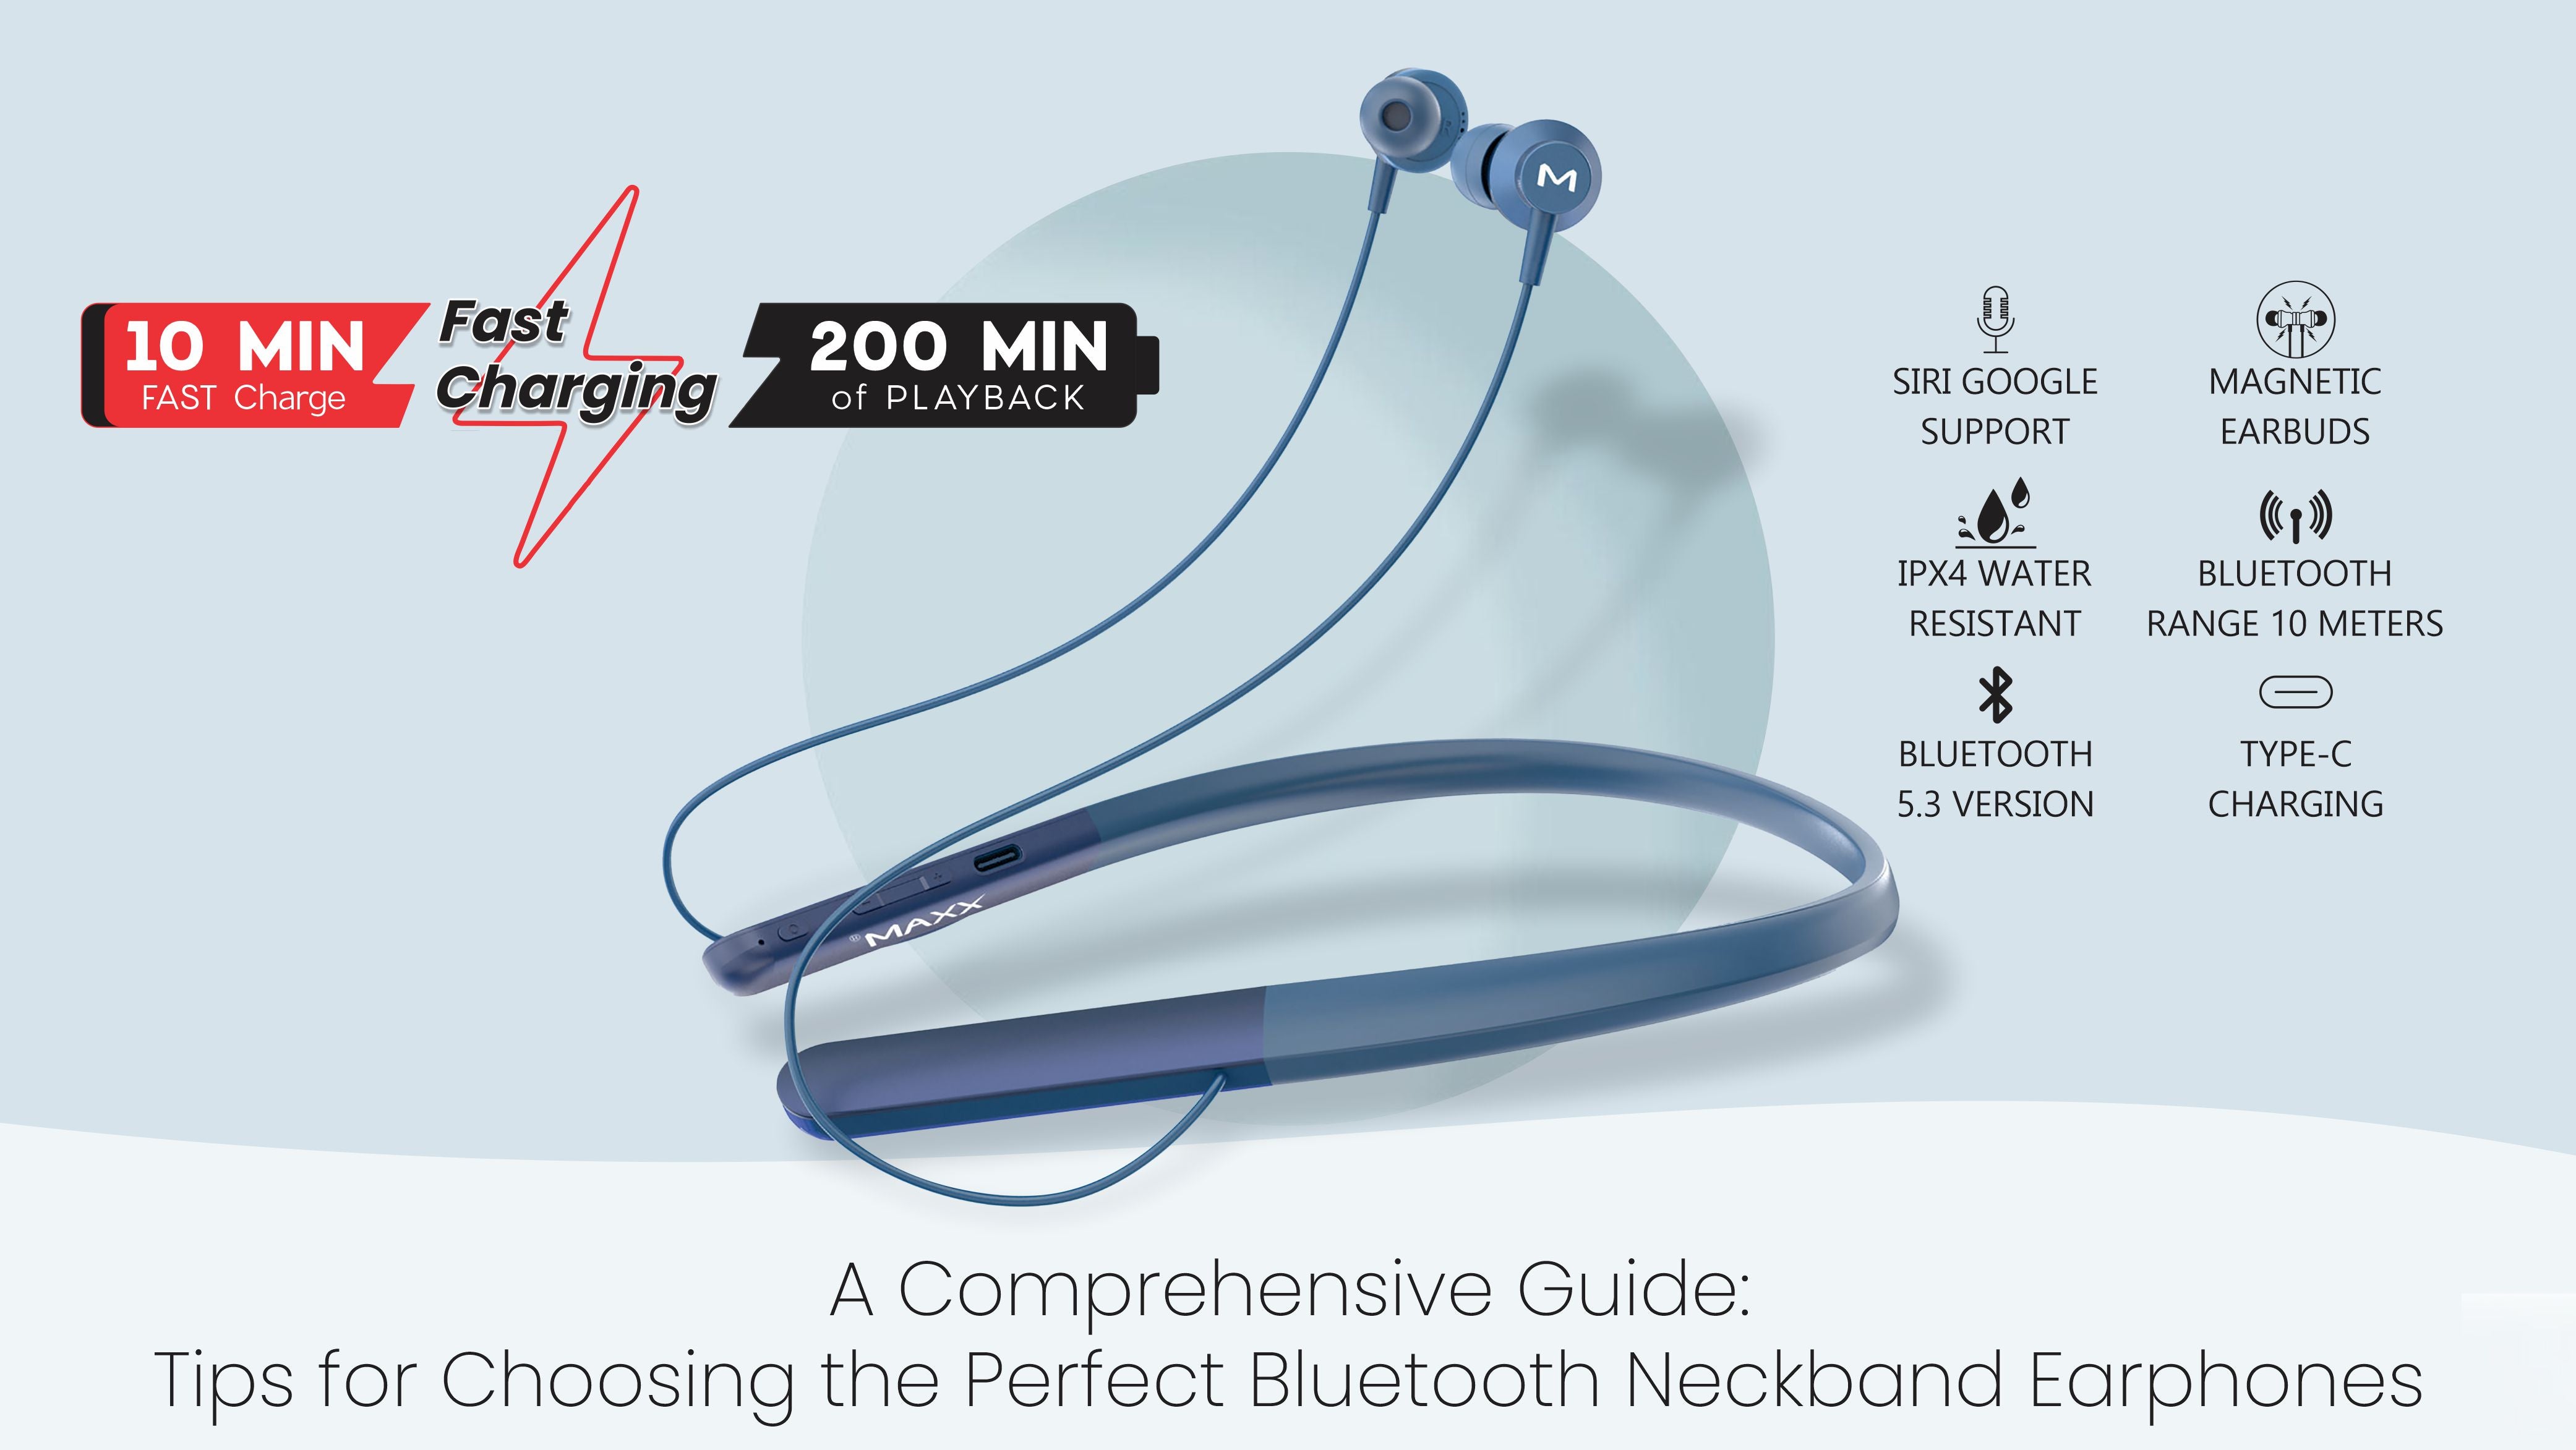 A Comprehensive Guide: Tips for Choosing the Perfect Bluetooth Neckband Earphones